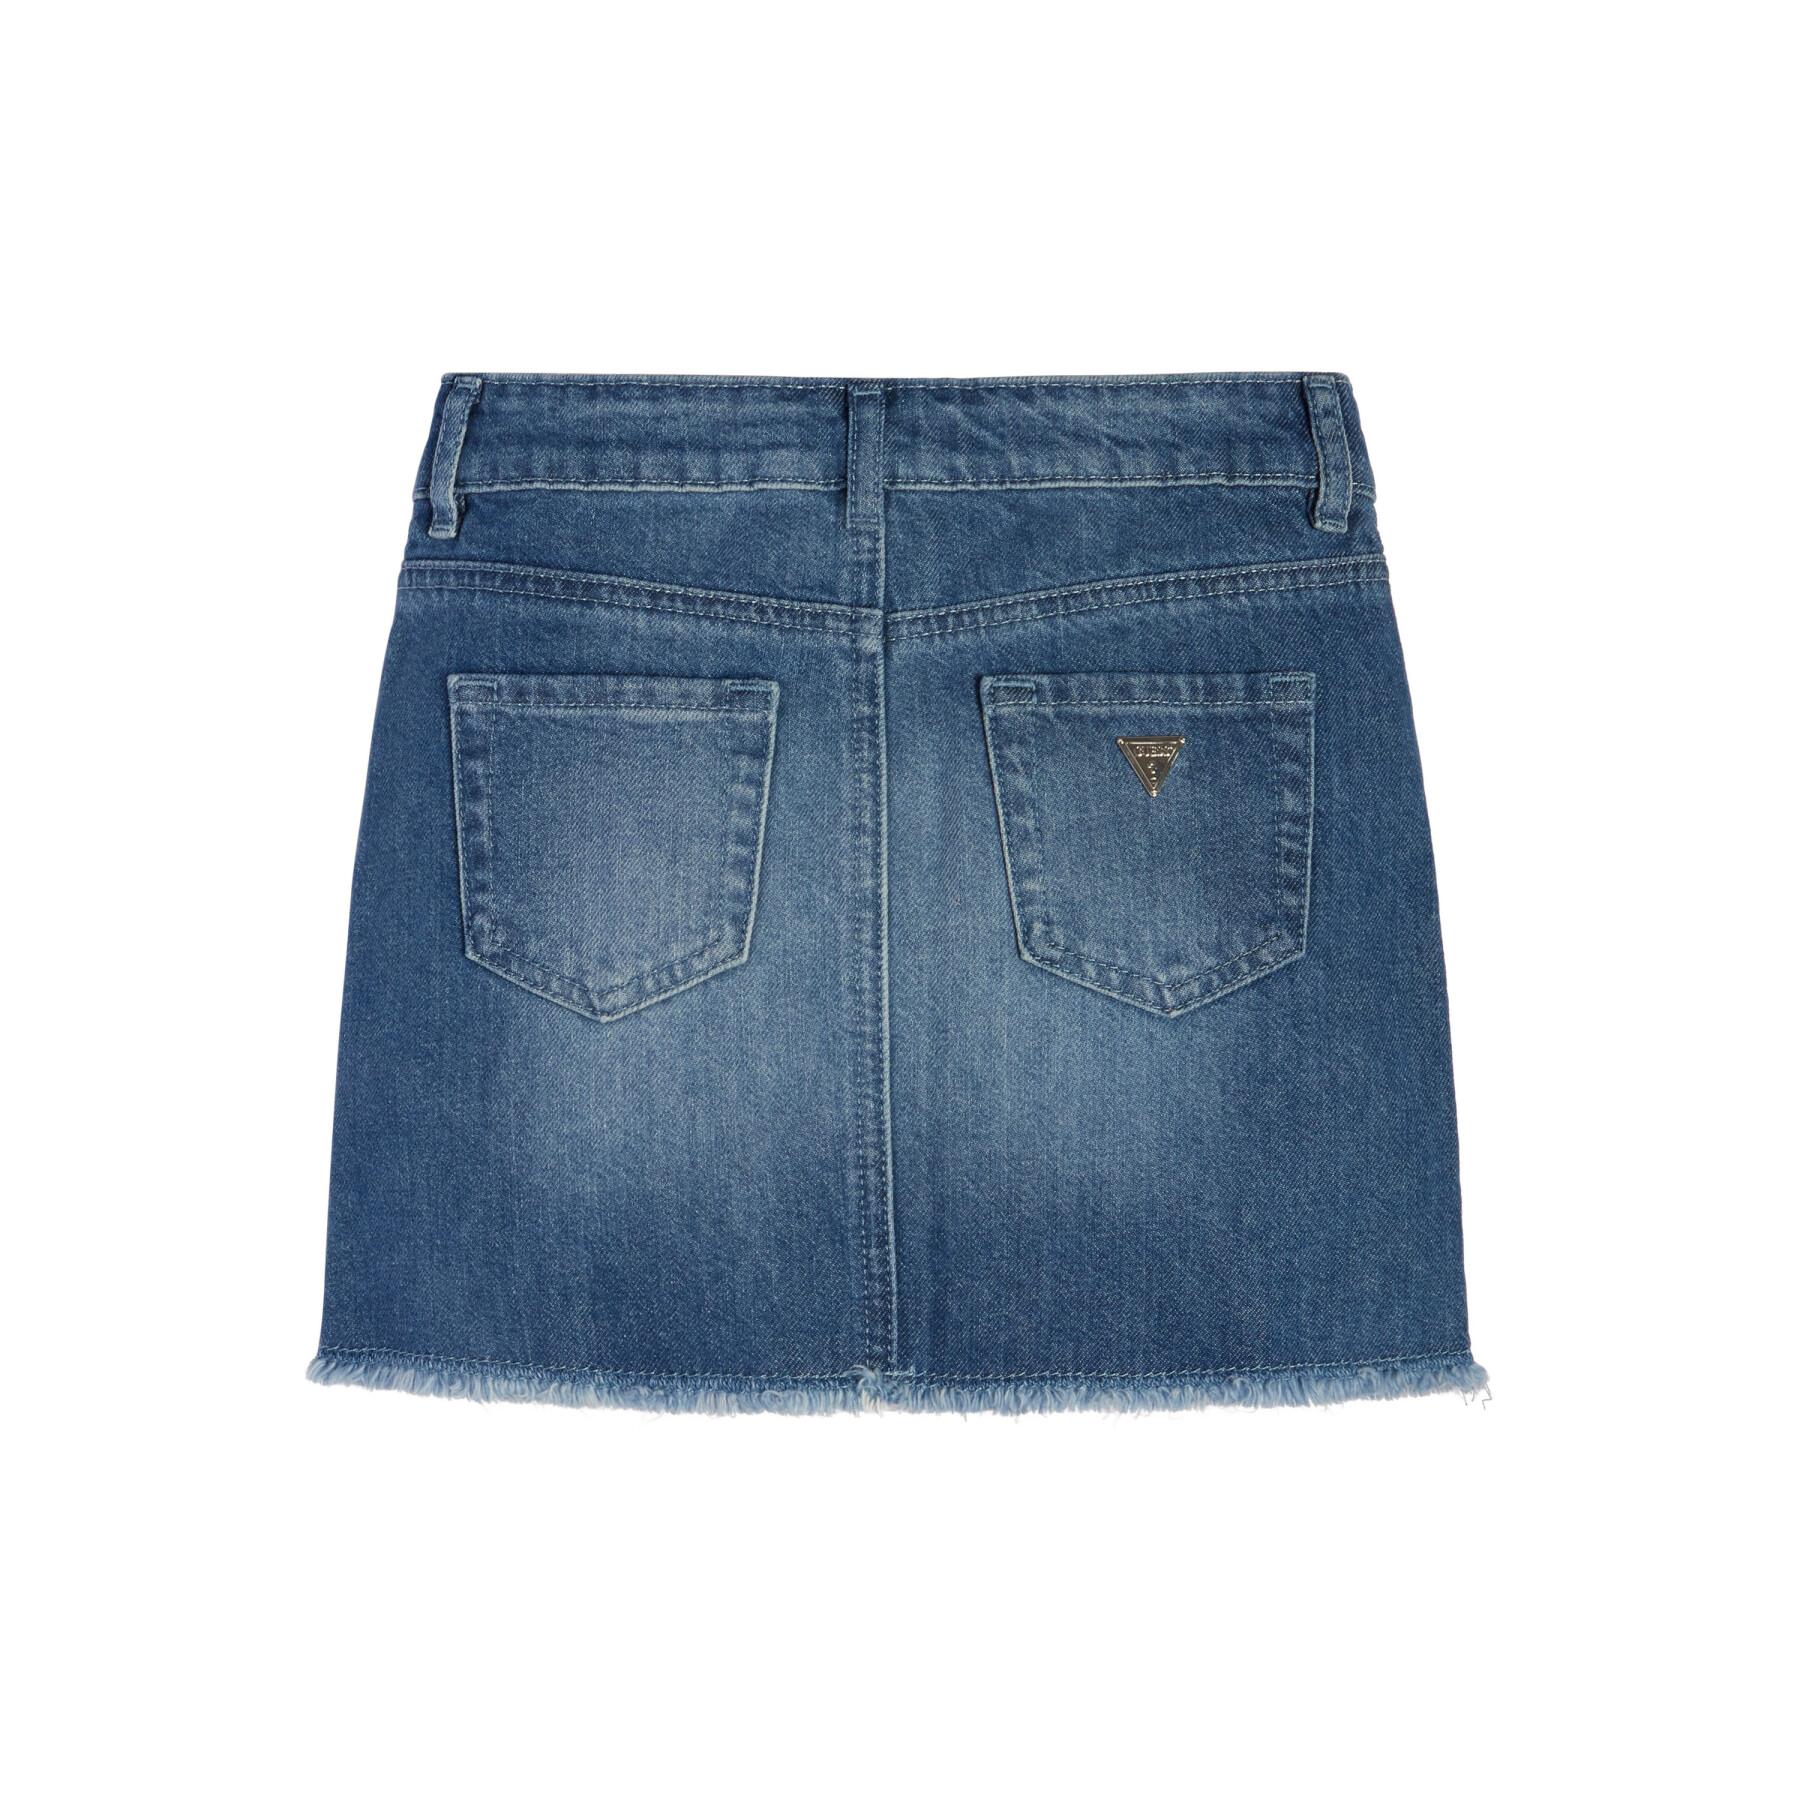 Girl's embroidered denim skirt Guess